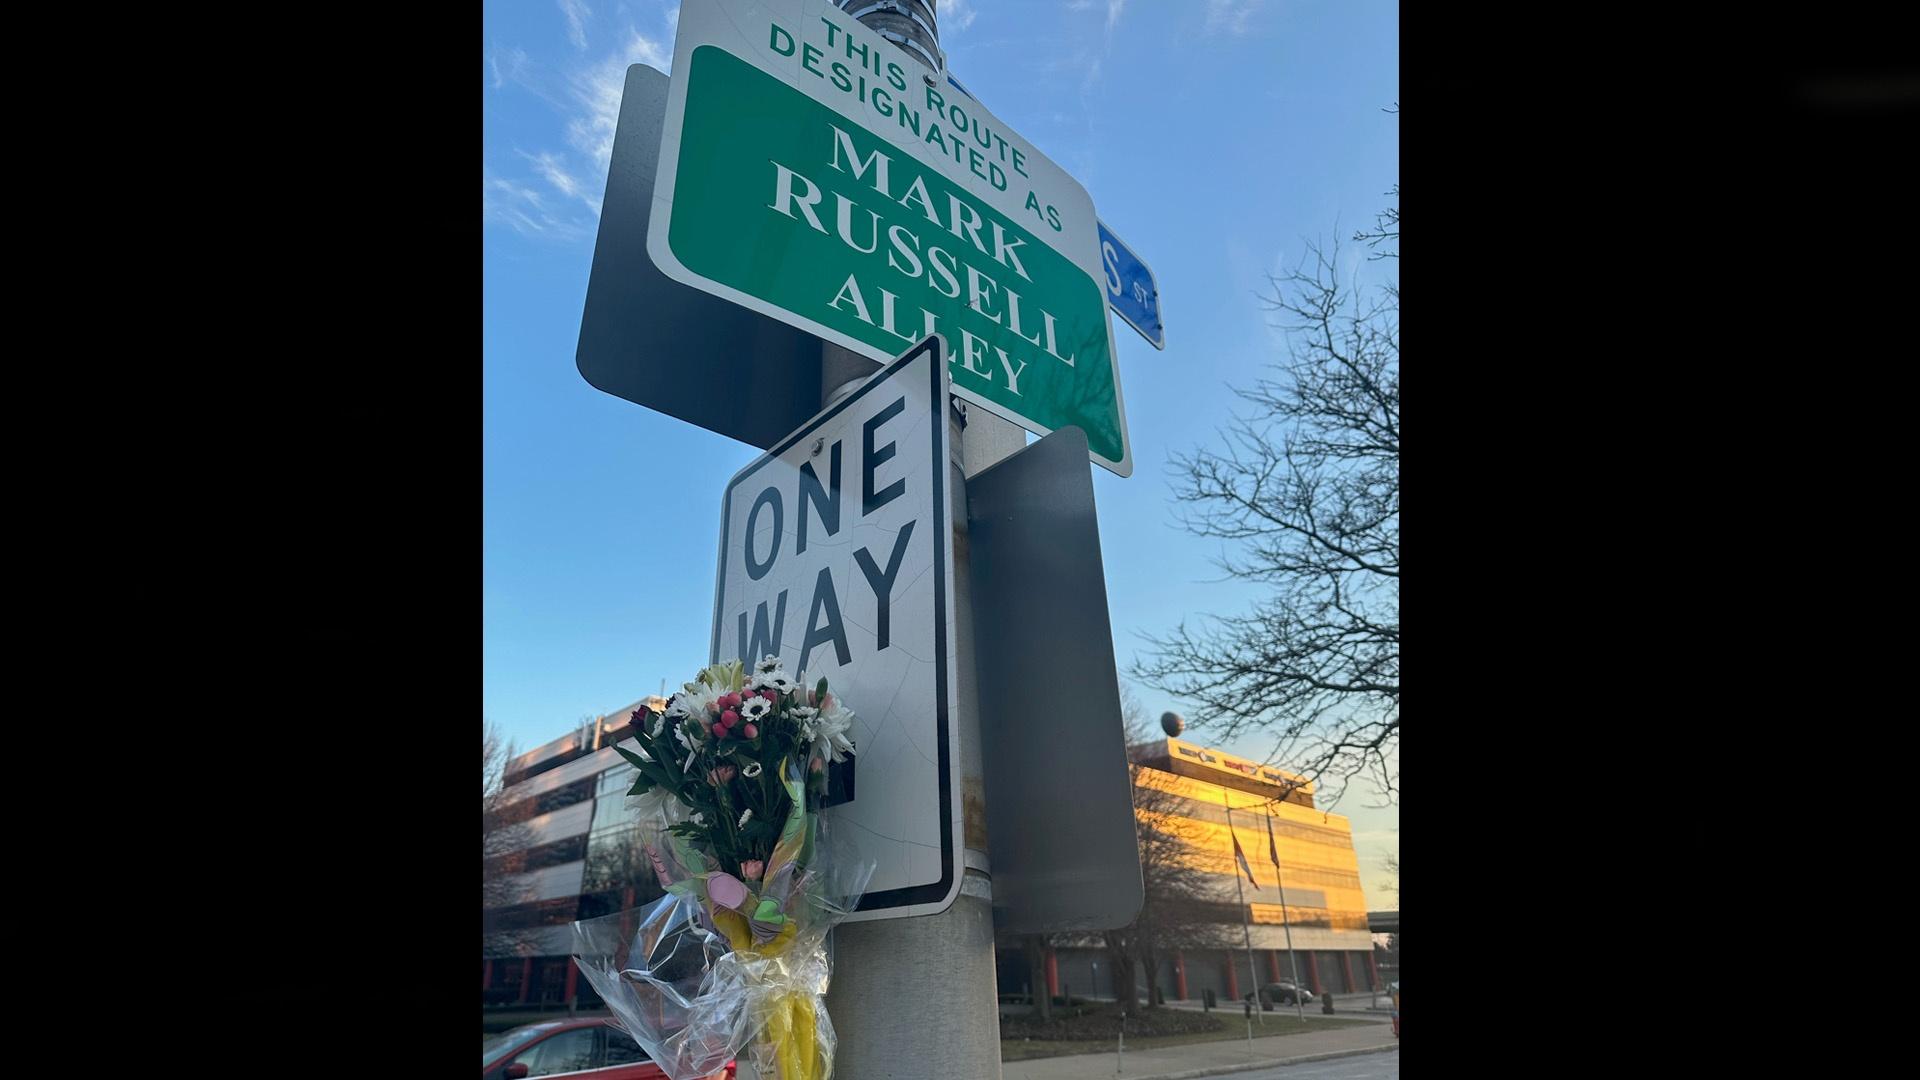 flowers left at street sign for "Mark Russell Alley" in front of Buffalo Toronto Public Media